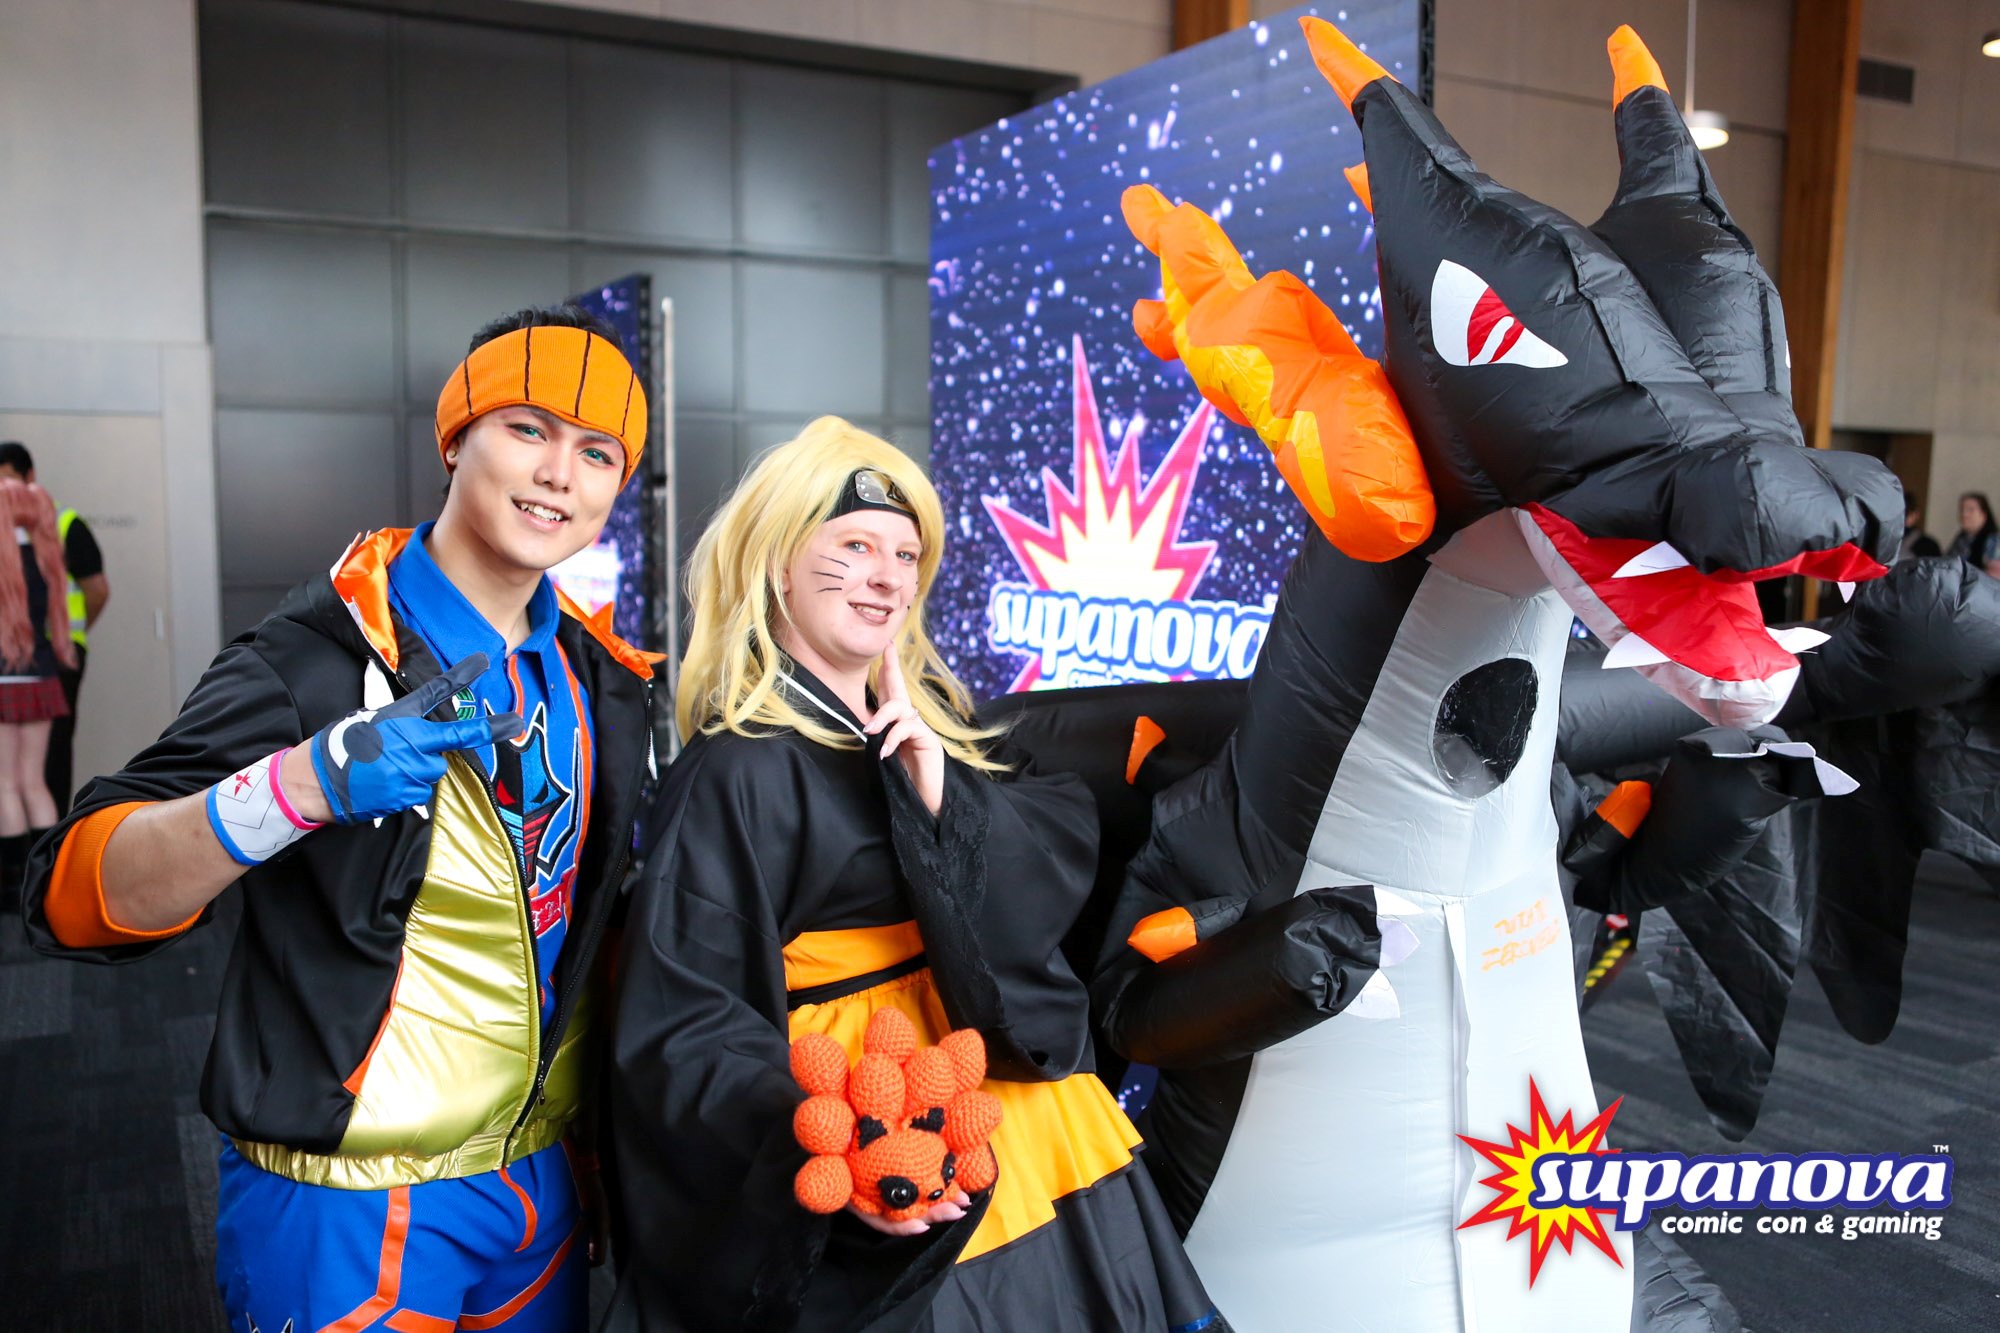 15-facts-about-supanova-comic-con-gaming-expo